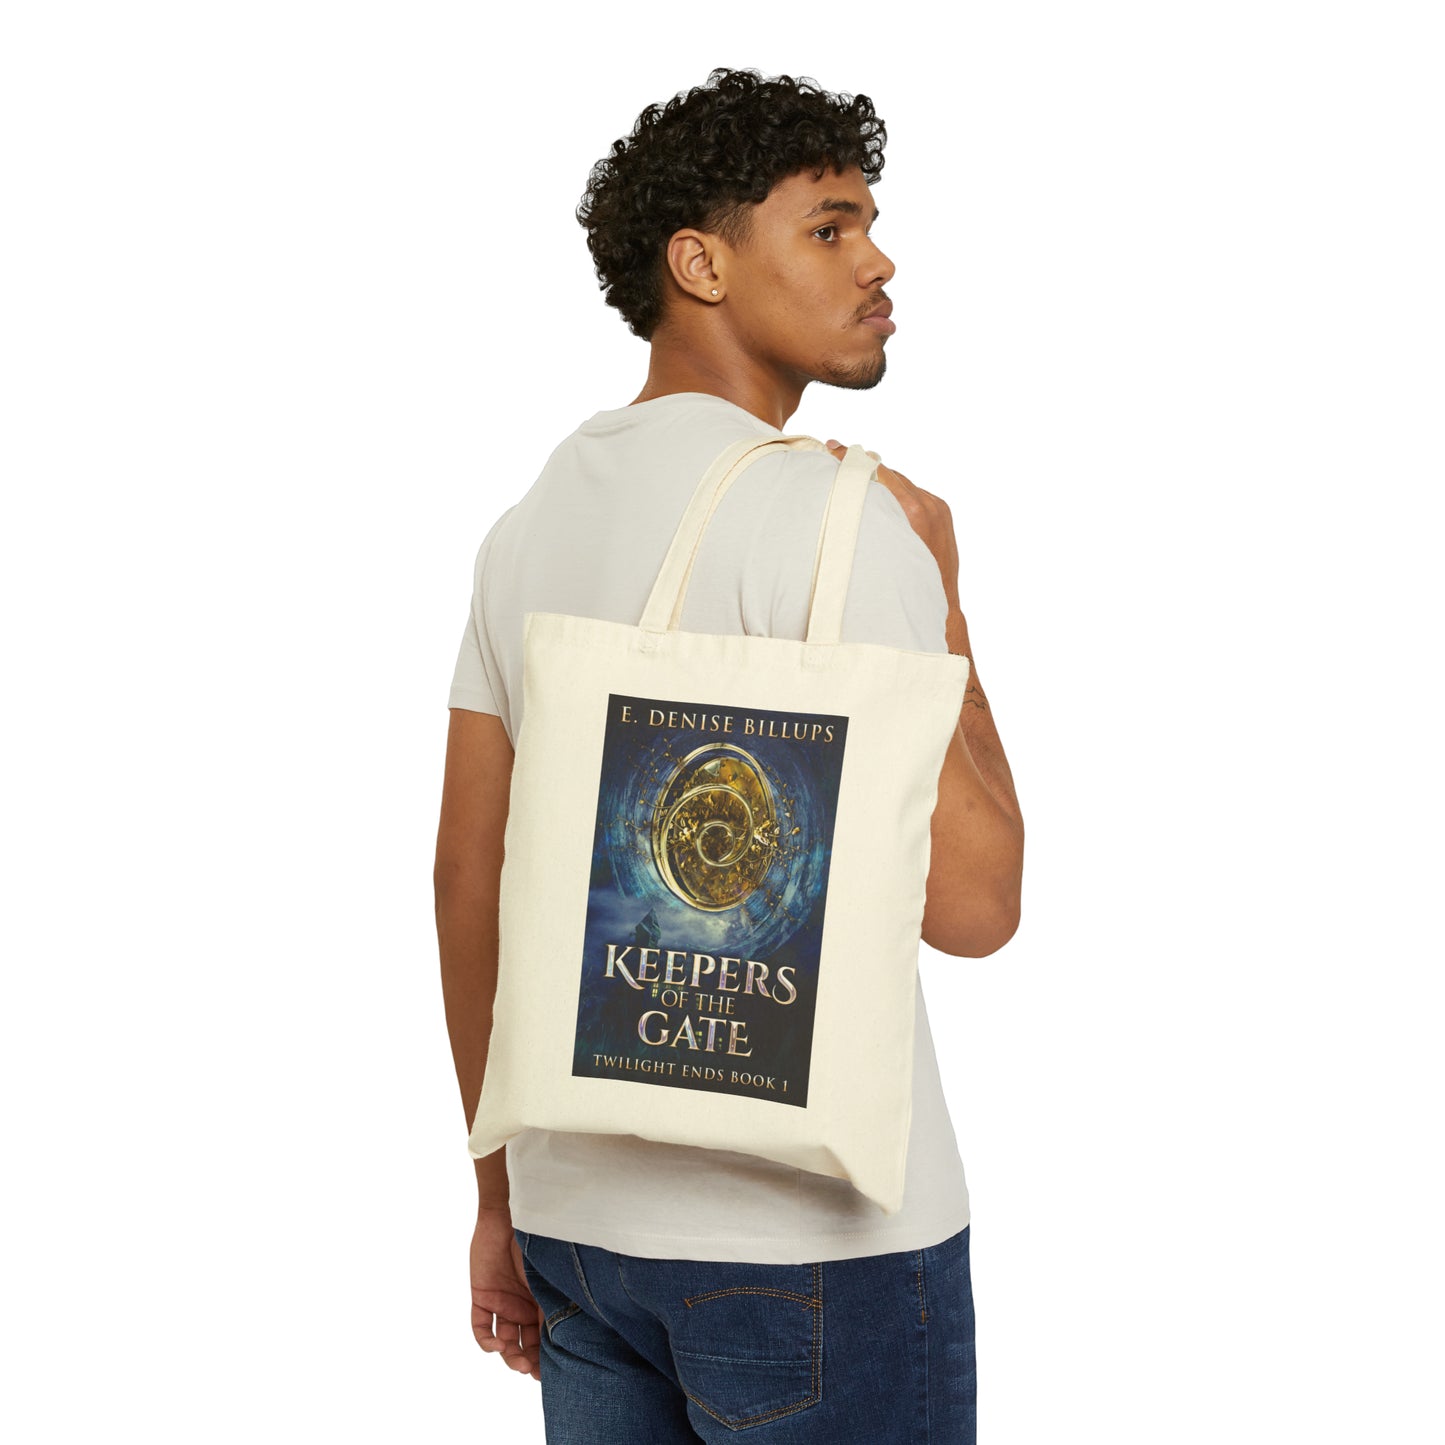 Keepers Of The Gate - Cotton Canvas Tote Bag